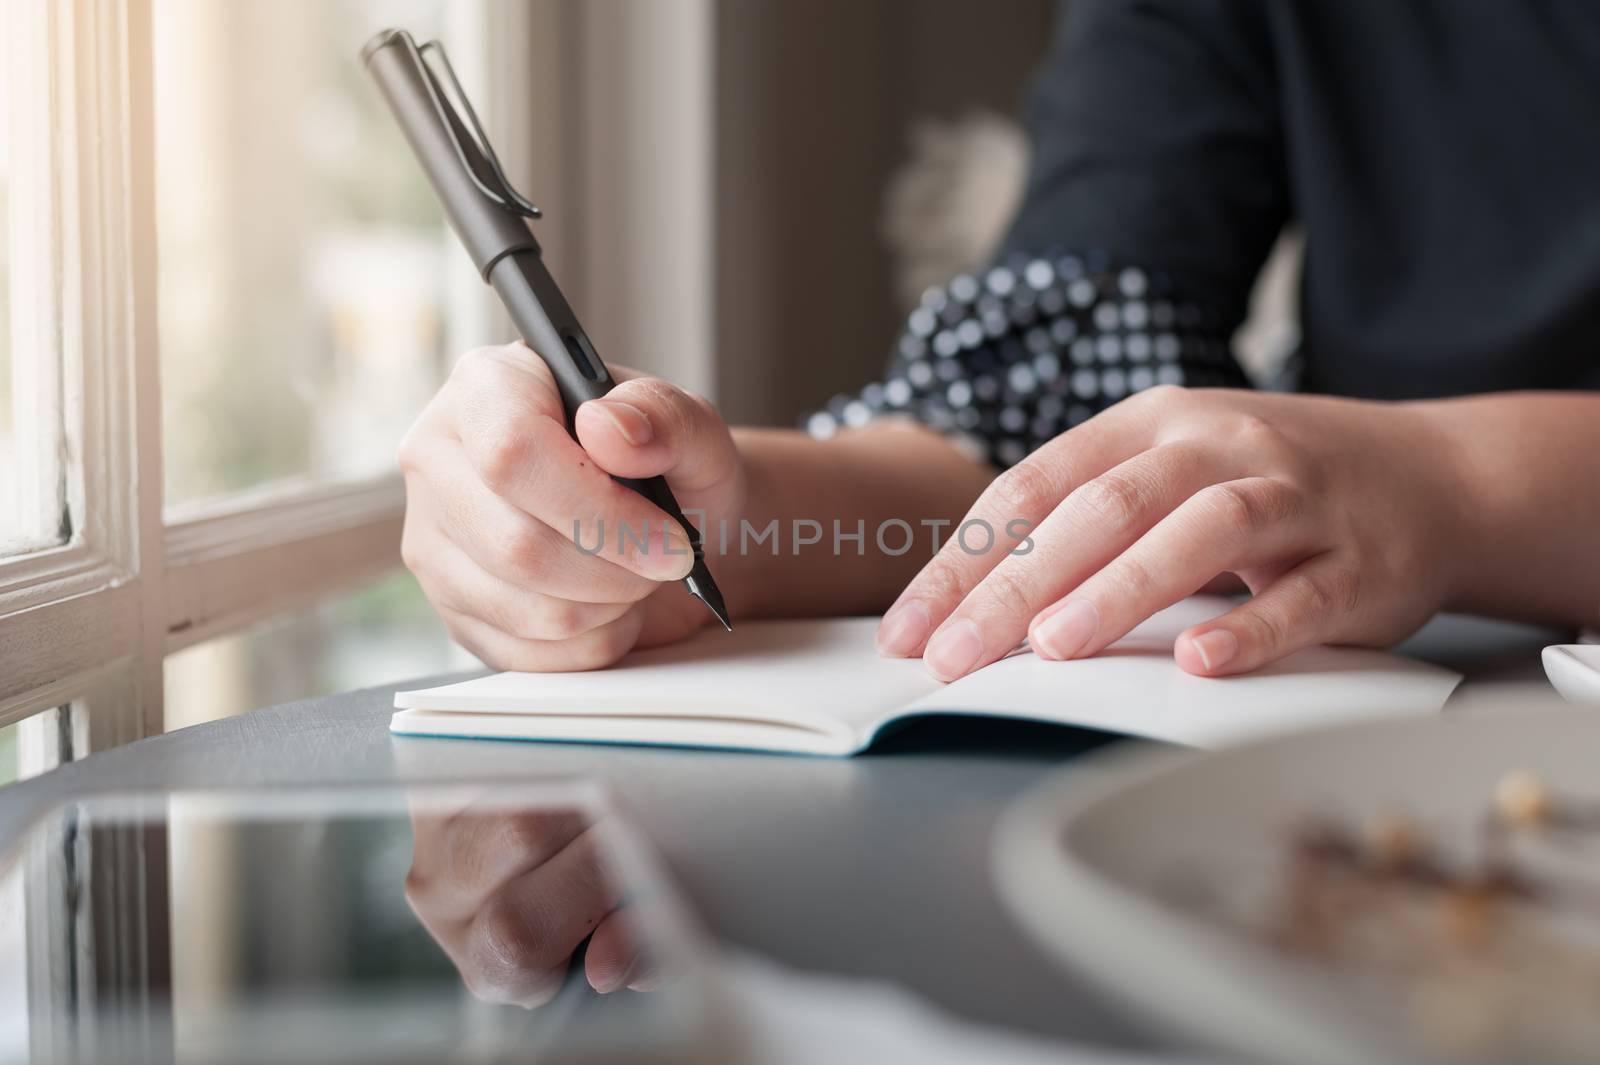 Woman hand holding pen while writing on small notebook beside window. Freelance journalist working at home concept.